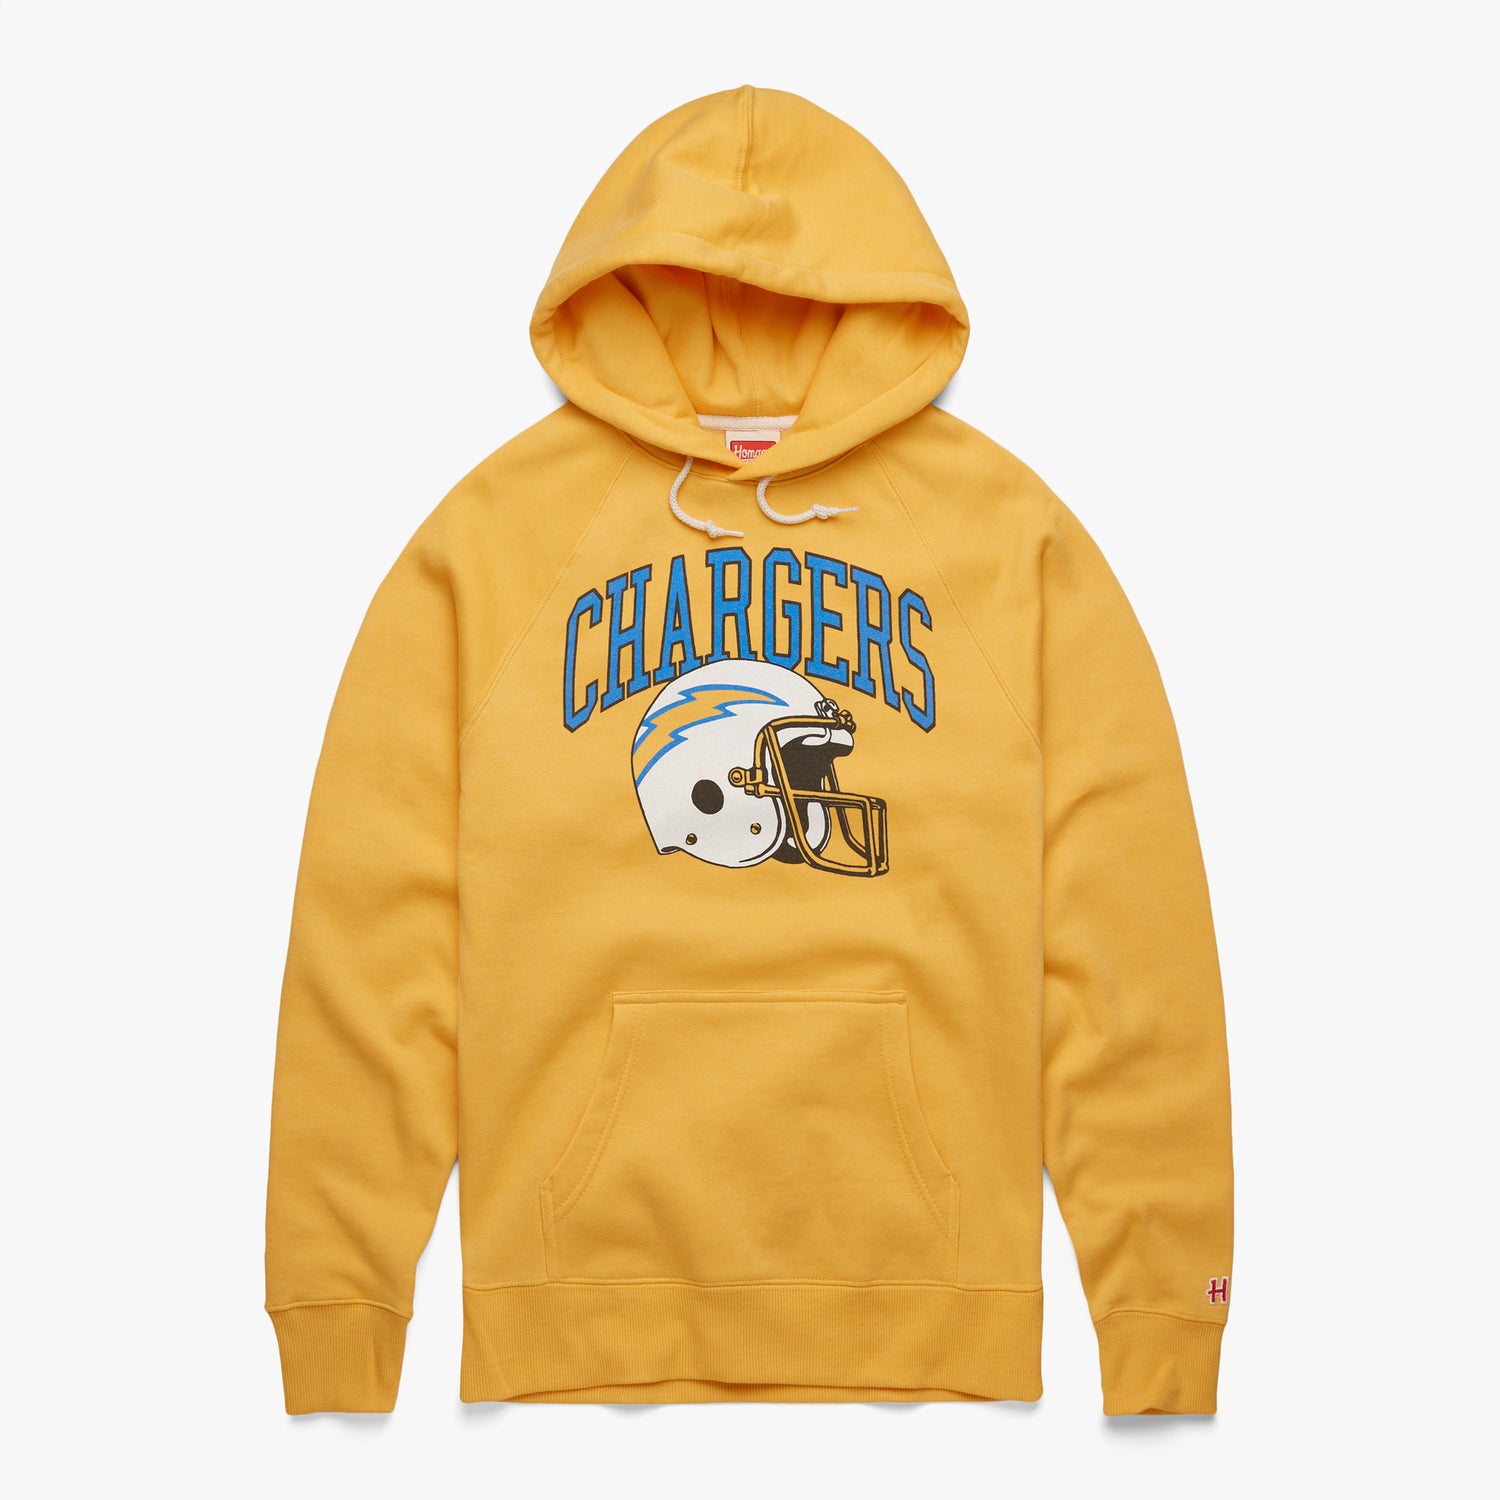 Indianapolis Colts Helmet Hoodie from Homage. | Officially Licensed Vintage NFL Apparel from Homage Pro Shop.